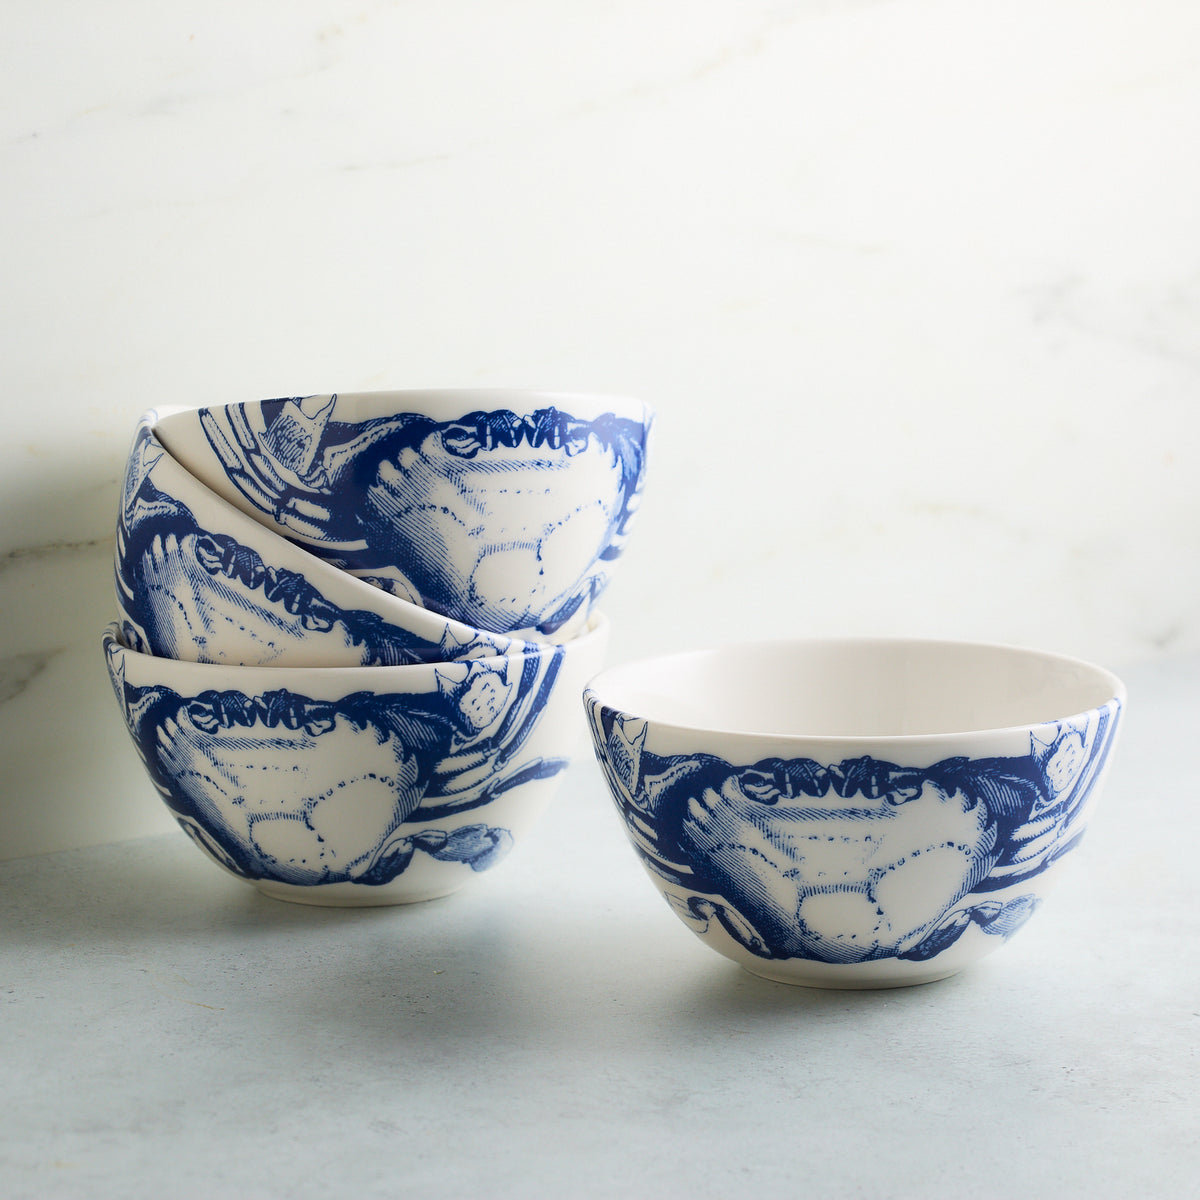 A stack of three blue and white high-fired porcelain bowls with a charming Crabs pattern on a marble surface, next to an additional matching Crab Cereal Bowl by Caskata to the right.